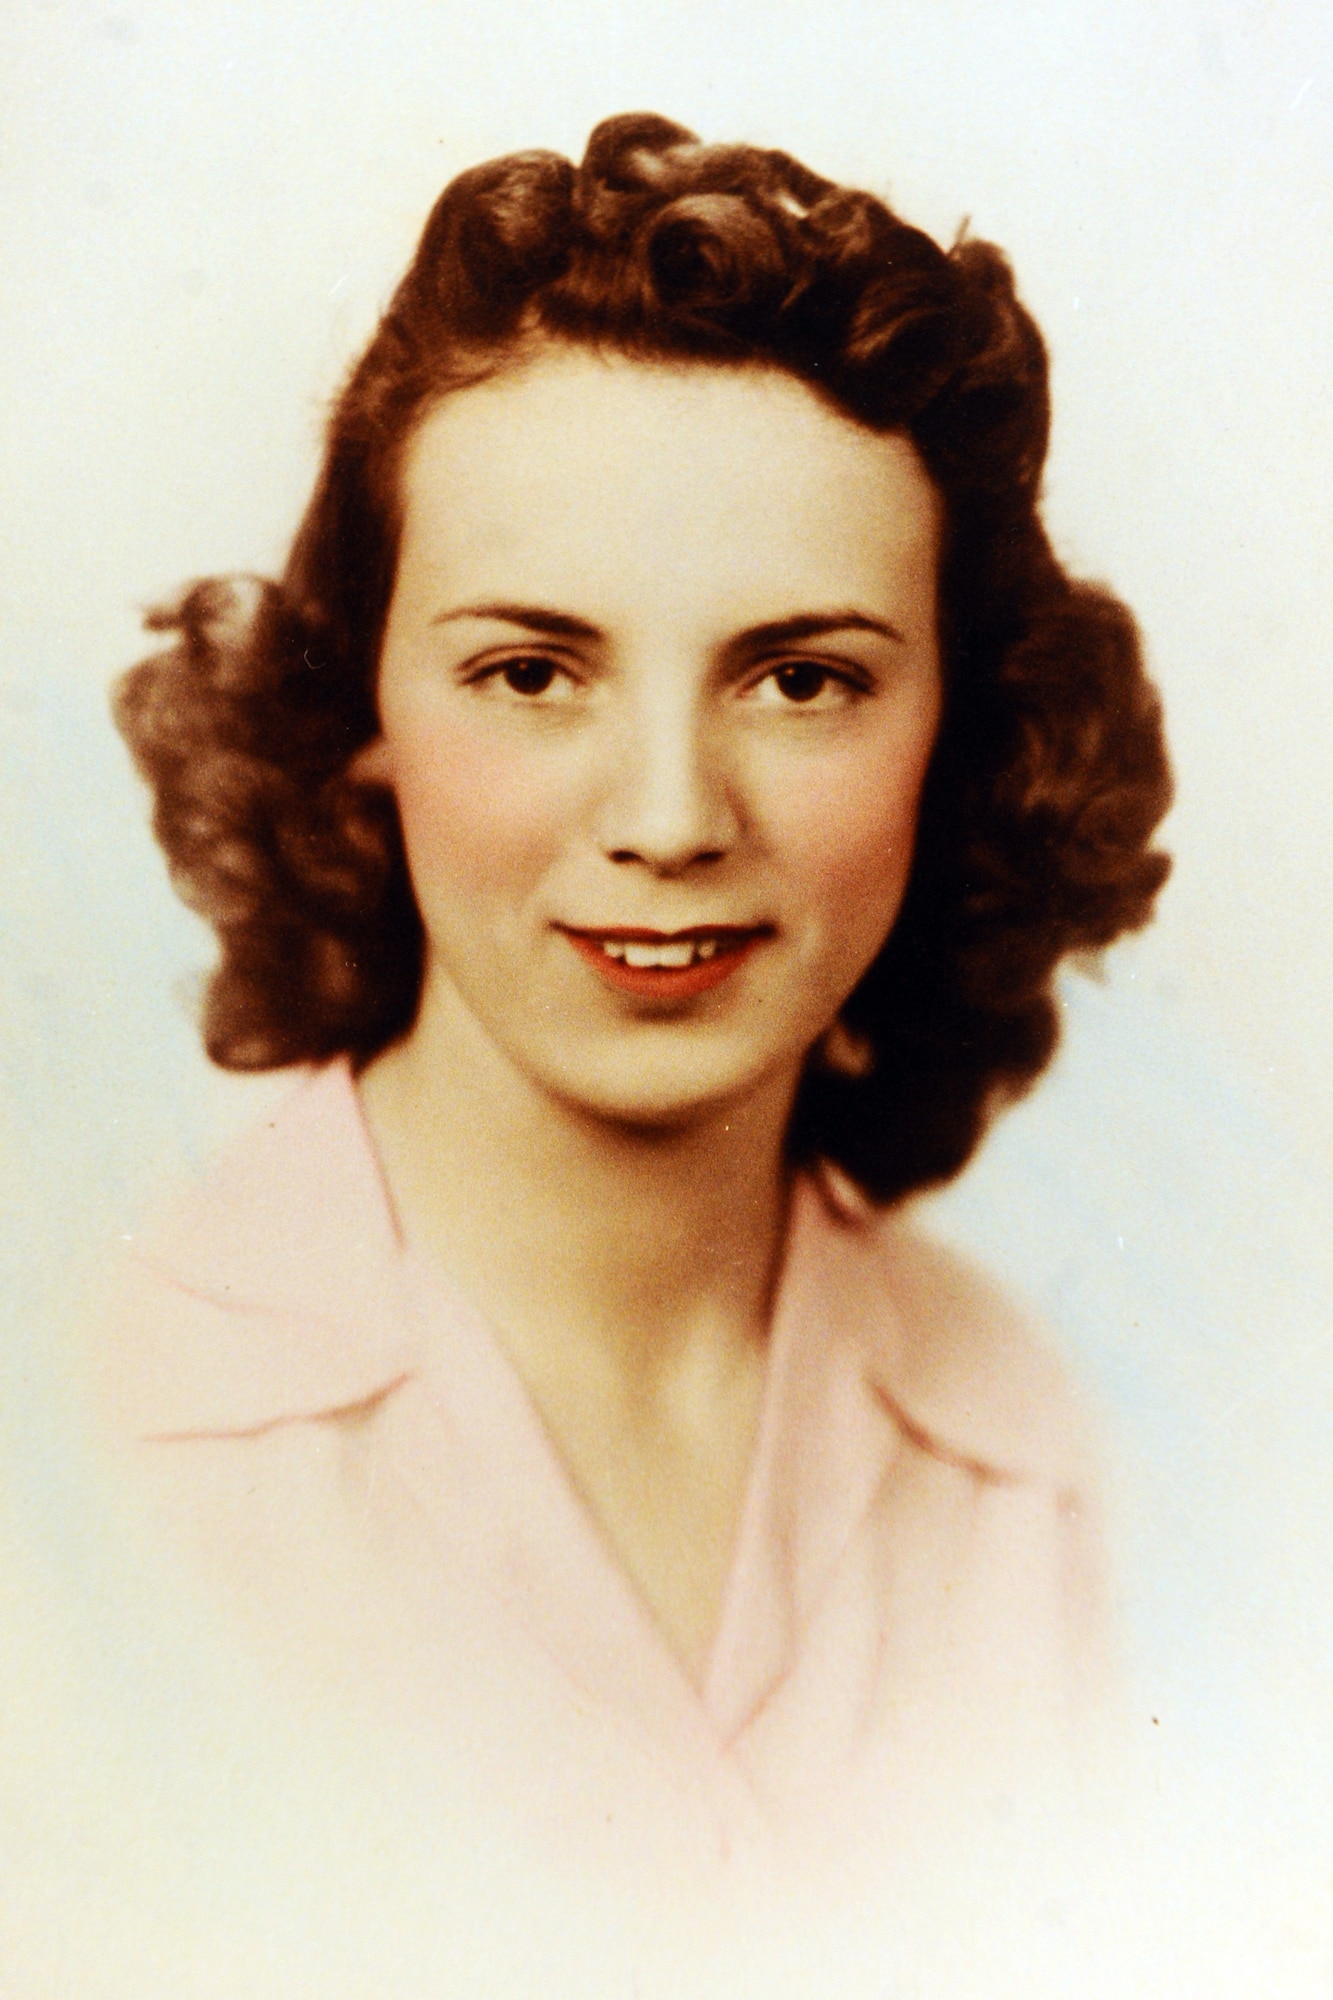 Portrait of Kathryn Narmi Shudak in the early 1940s when she was employed at the Glenn L. Martin-Nebraska Bomber Plant to drive rivets into B-29 Bombers in support of the war effort.  Shudak worked at the plant from 1942 to 1945 as one of many Rosie the Riveters.  (U.S. Air Force photo by Josh Plueger/Released)